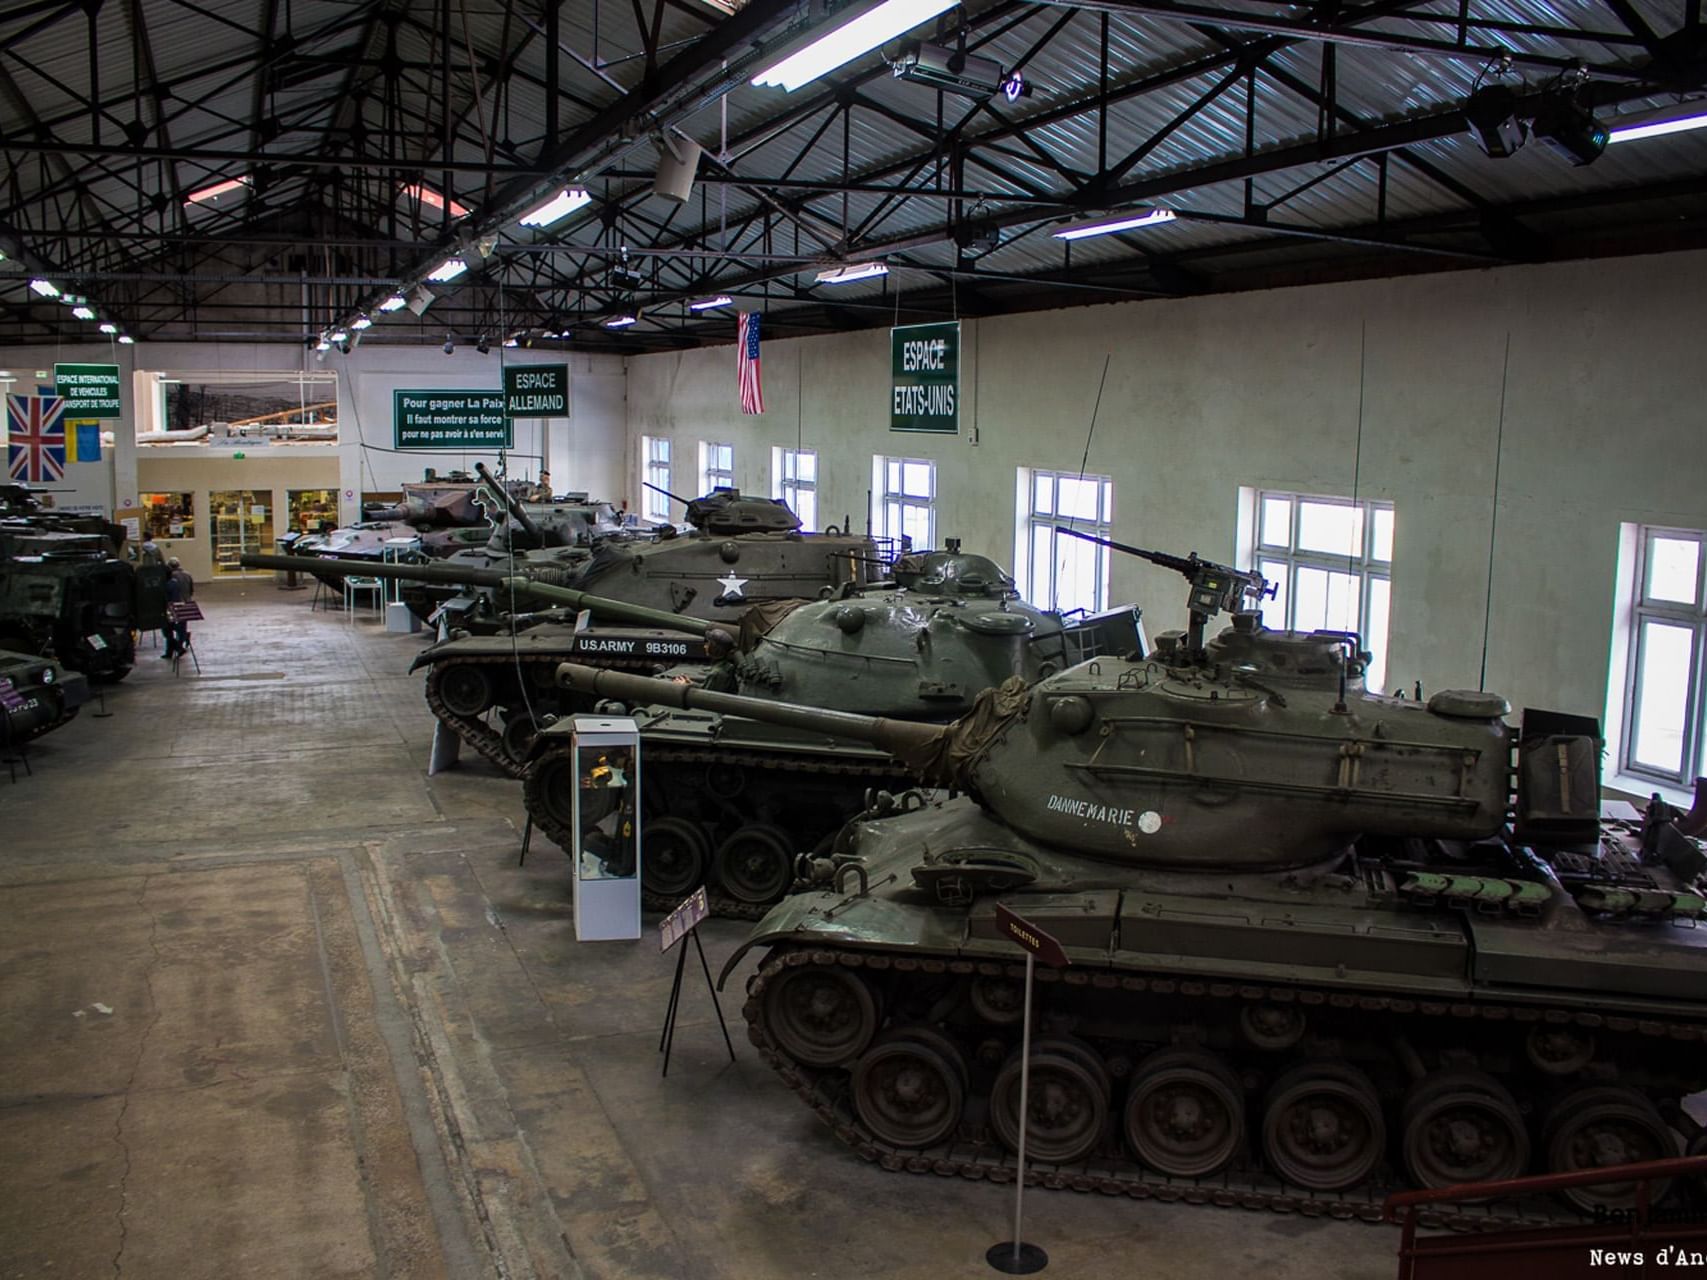 Tank Museum- Musee des Blindes near The Originals Hotels